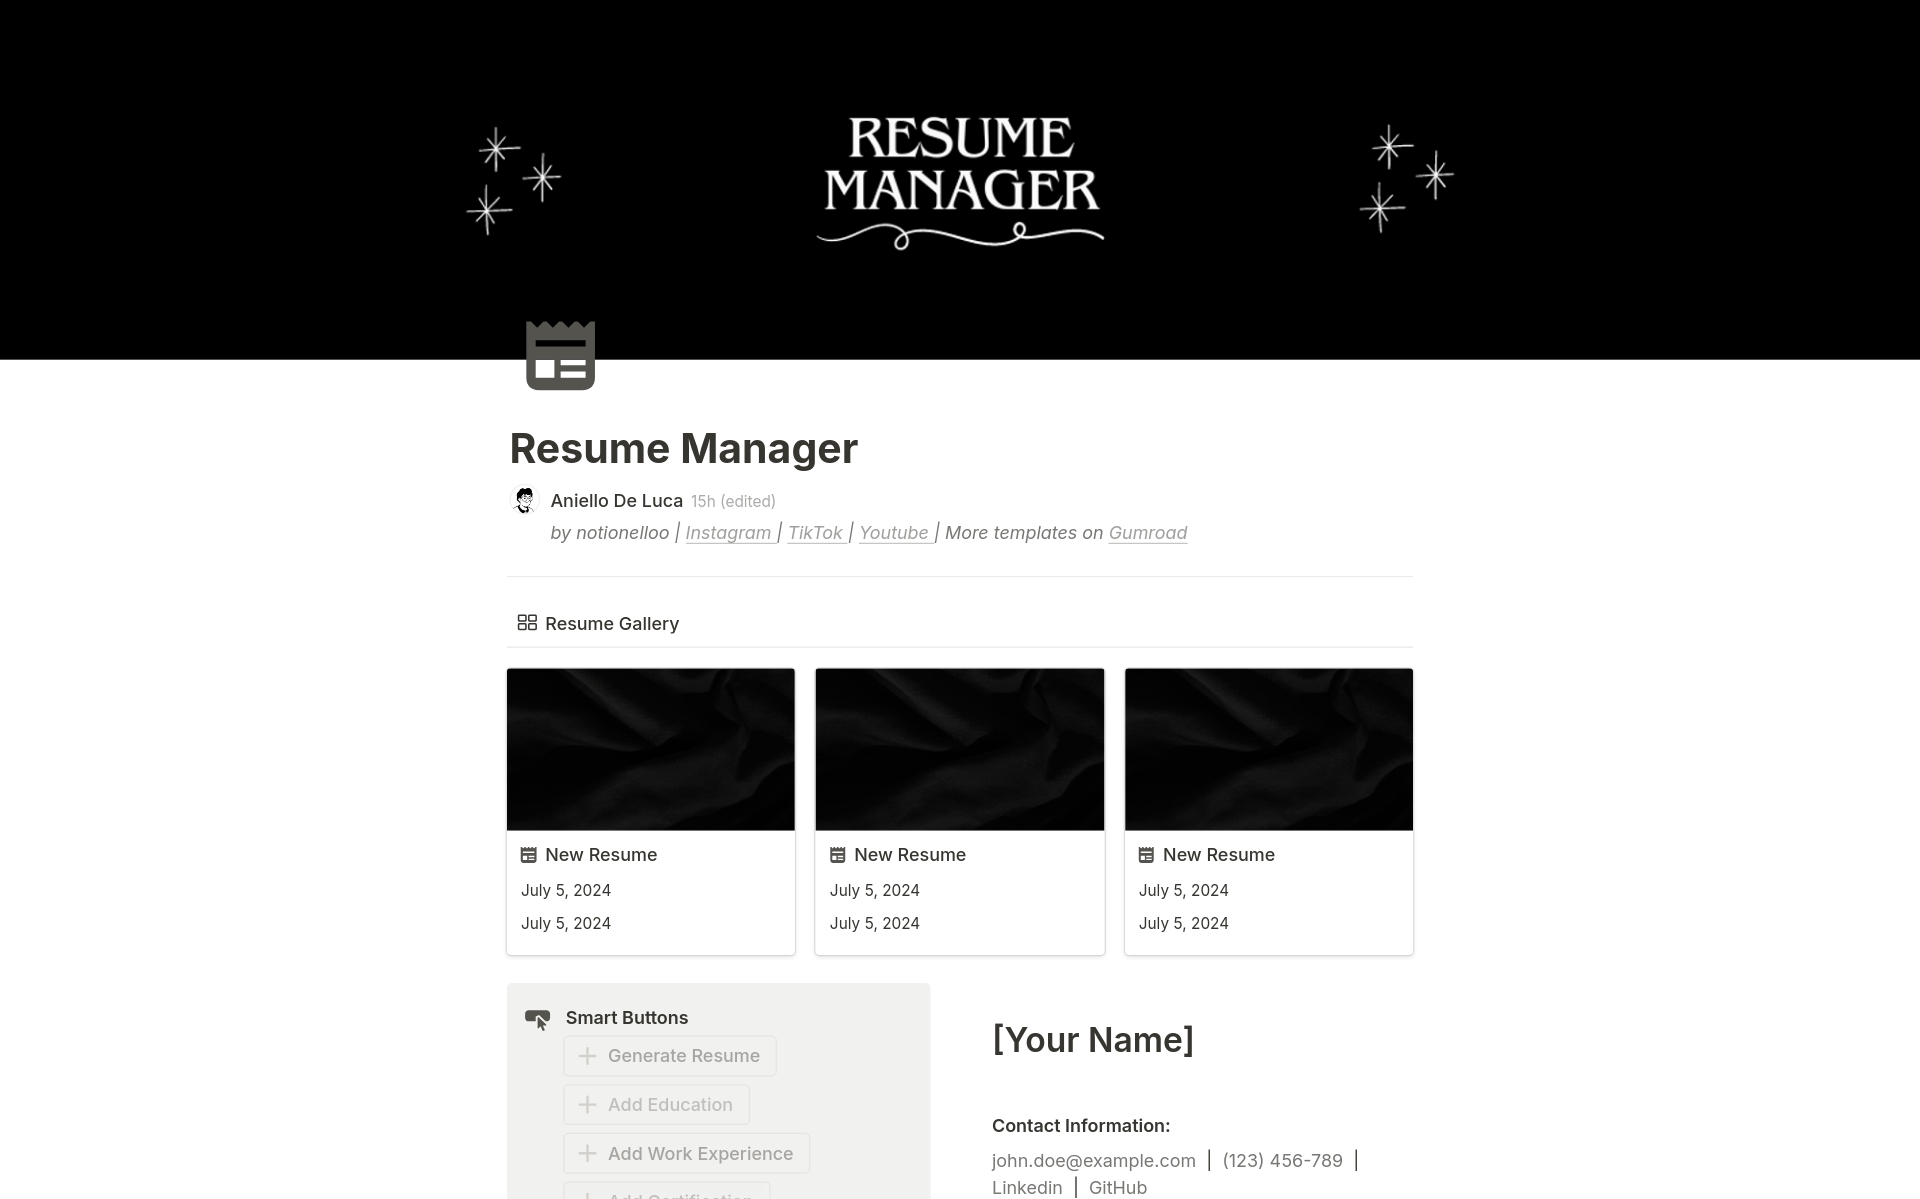 Effortlessly manage your resume with our comprehensive template. Organize work experience, education, certifications, projects, languages, and skills in one place. Perfect for professionals seeking an easy-to-use resume tool. Follow us on TikTok, YouTube, and GumRoad for more. 